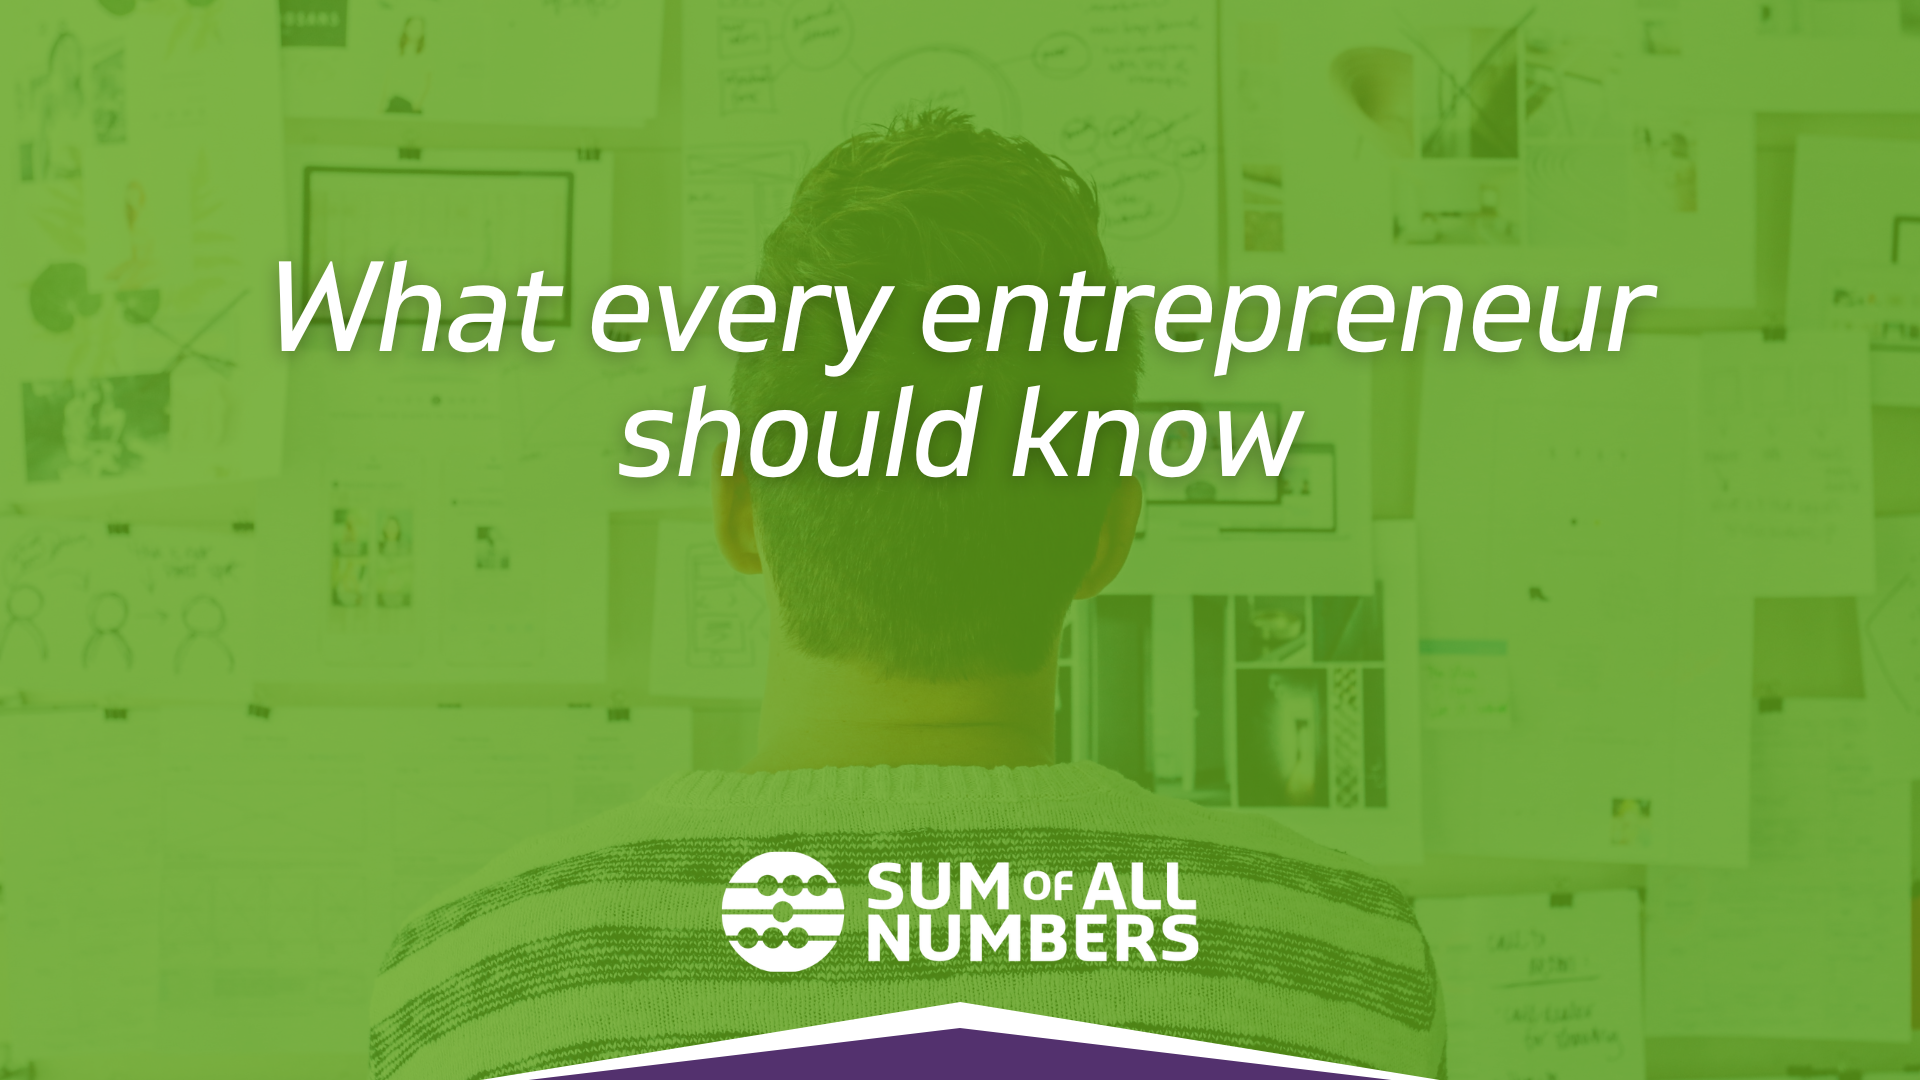 What every entrepreneur should know